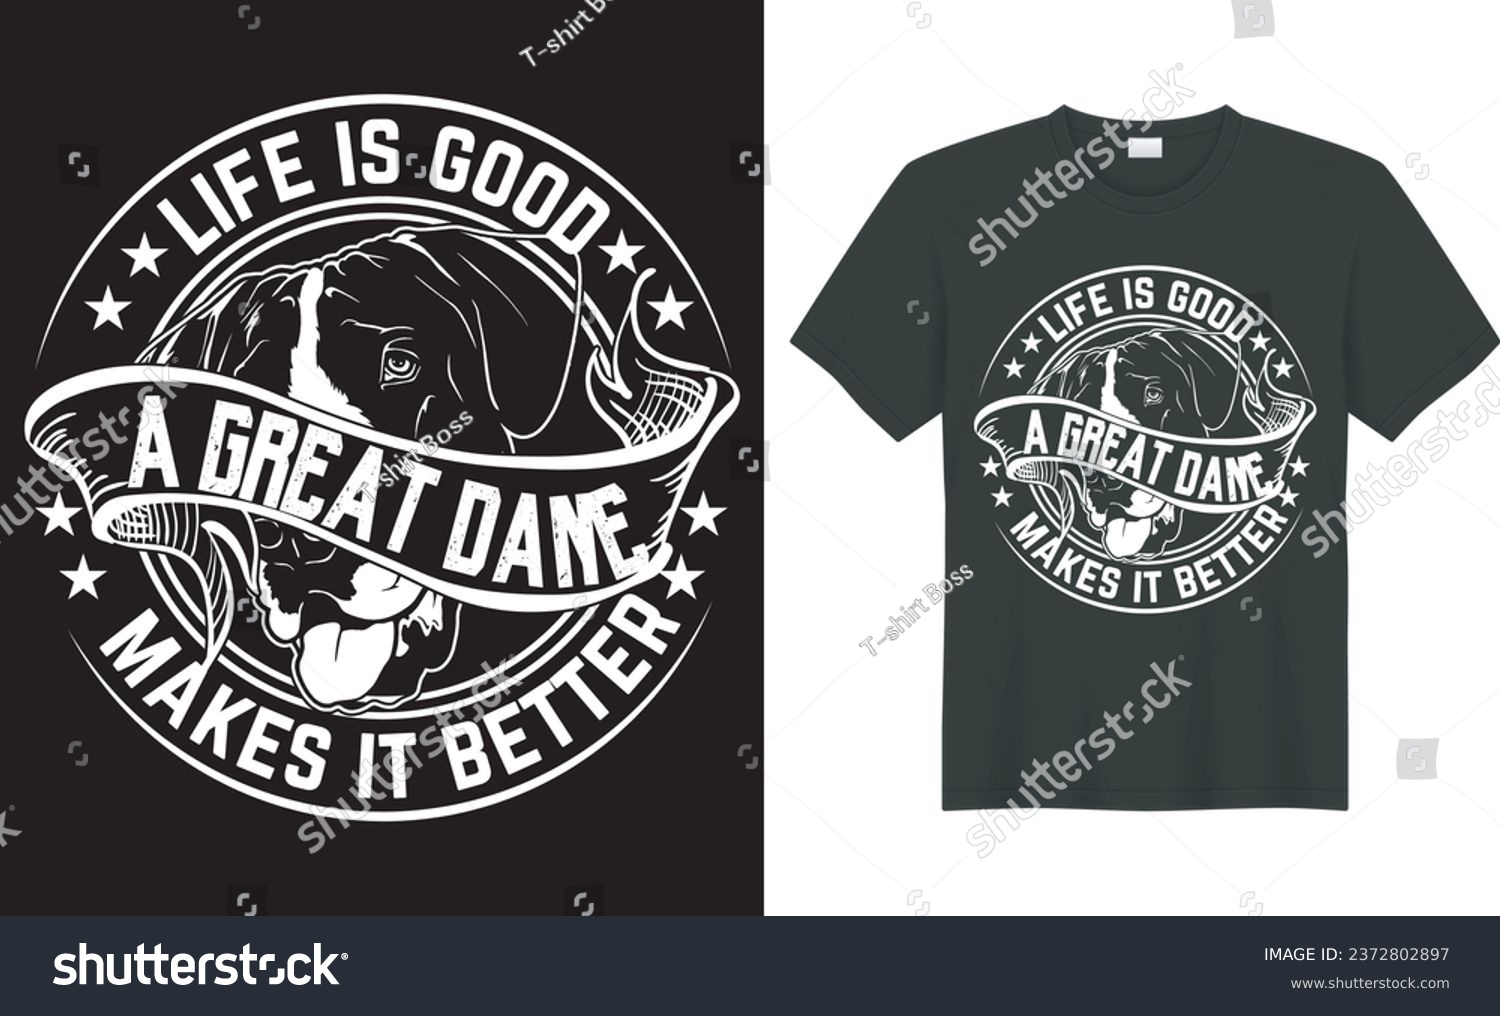 SVG of  Great Dane silhouette vintage and retro t-shirt design. life is good a great dane makes it better. perfect for print item dog t-shirt, coffee mug, poster, cards, pillow cover, sticker, Canvas desig,  svg